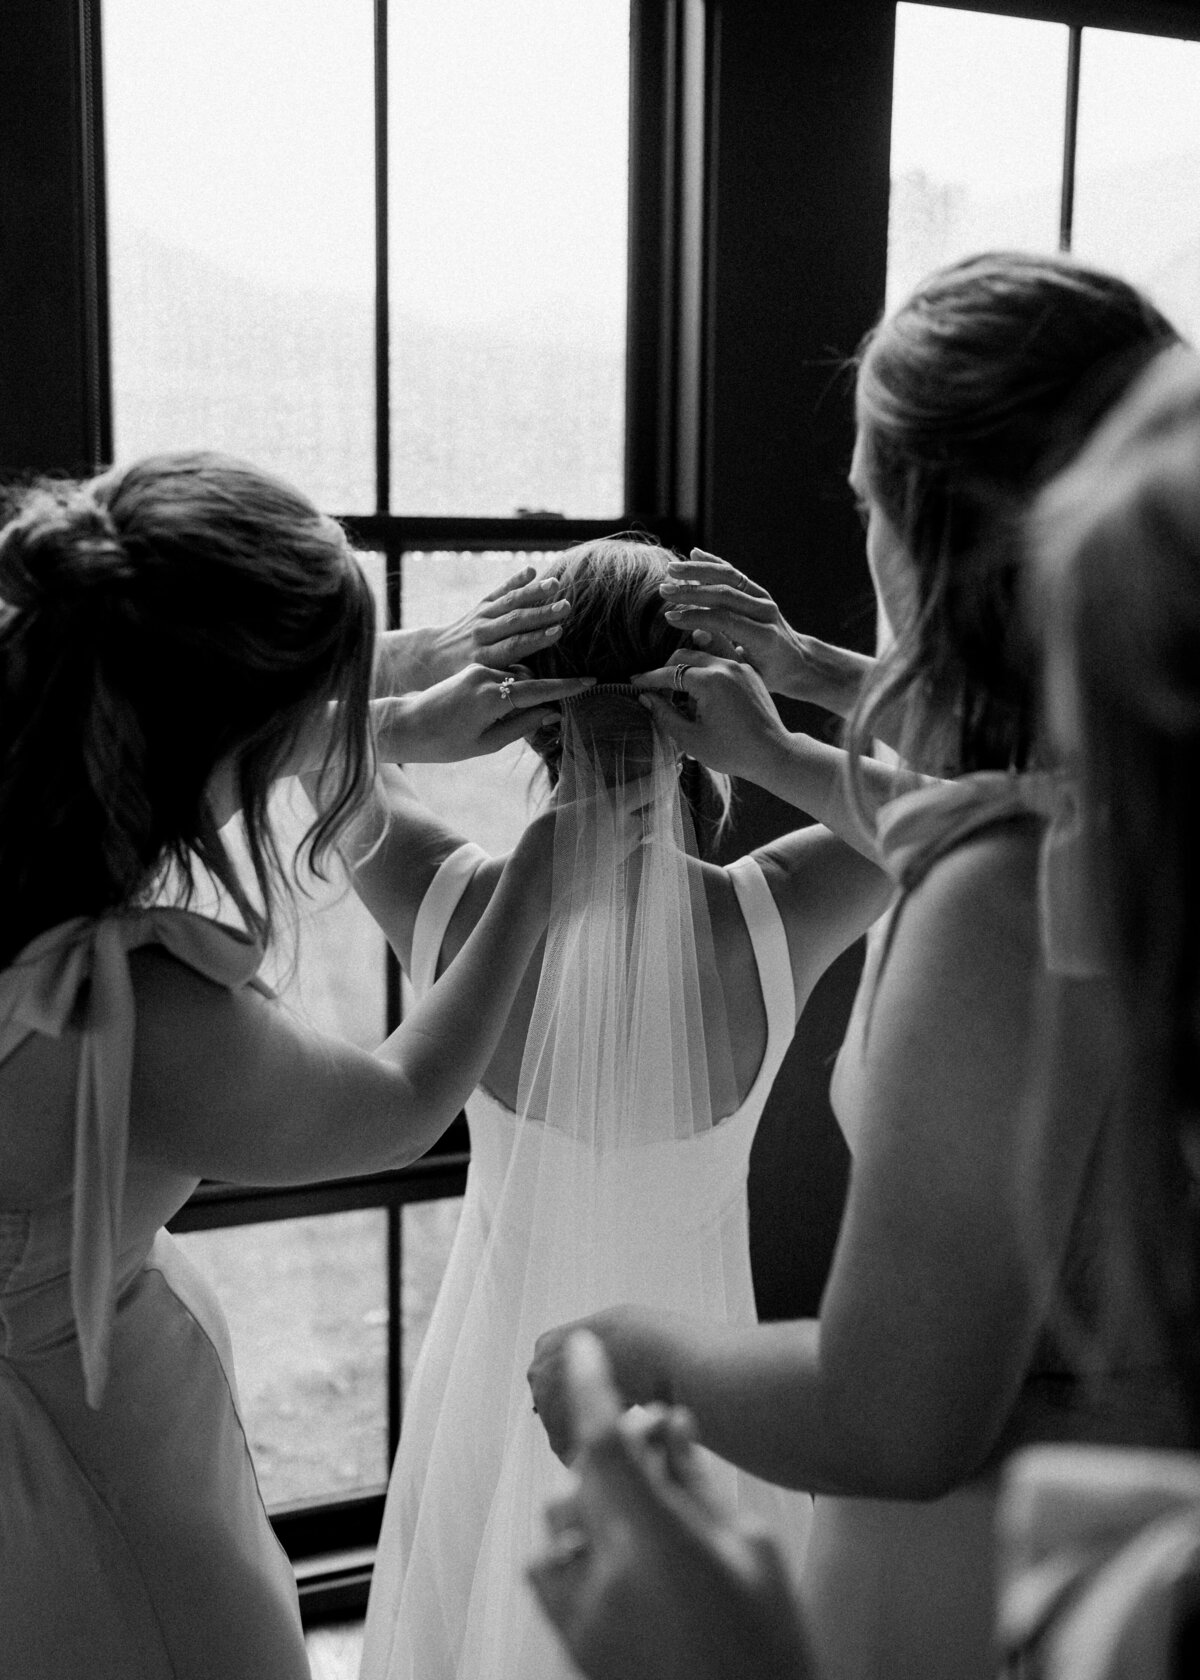 Virginia wedding photographer captures a great moment where the bridesmaids are helping the bride secure her veil